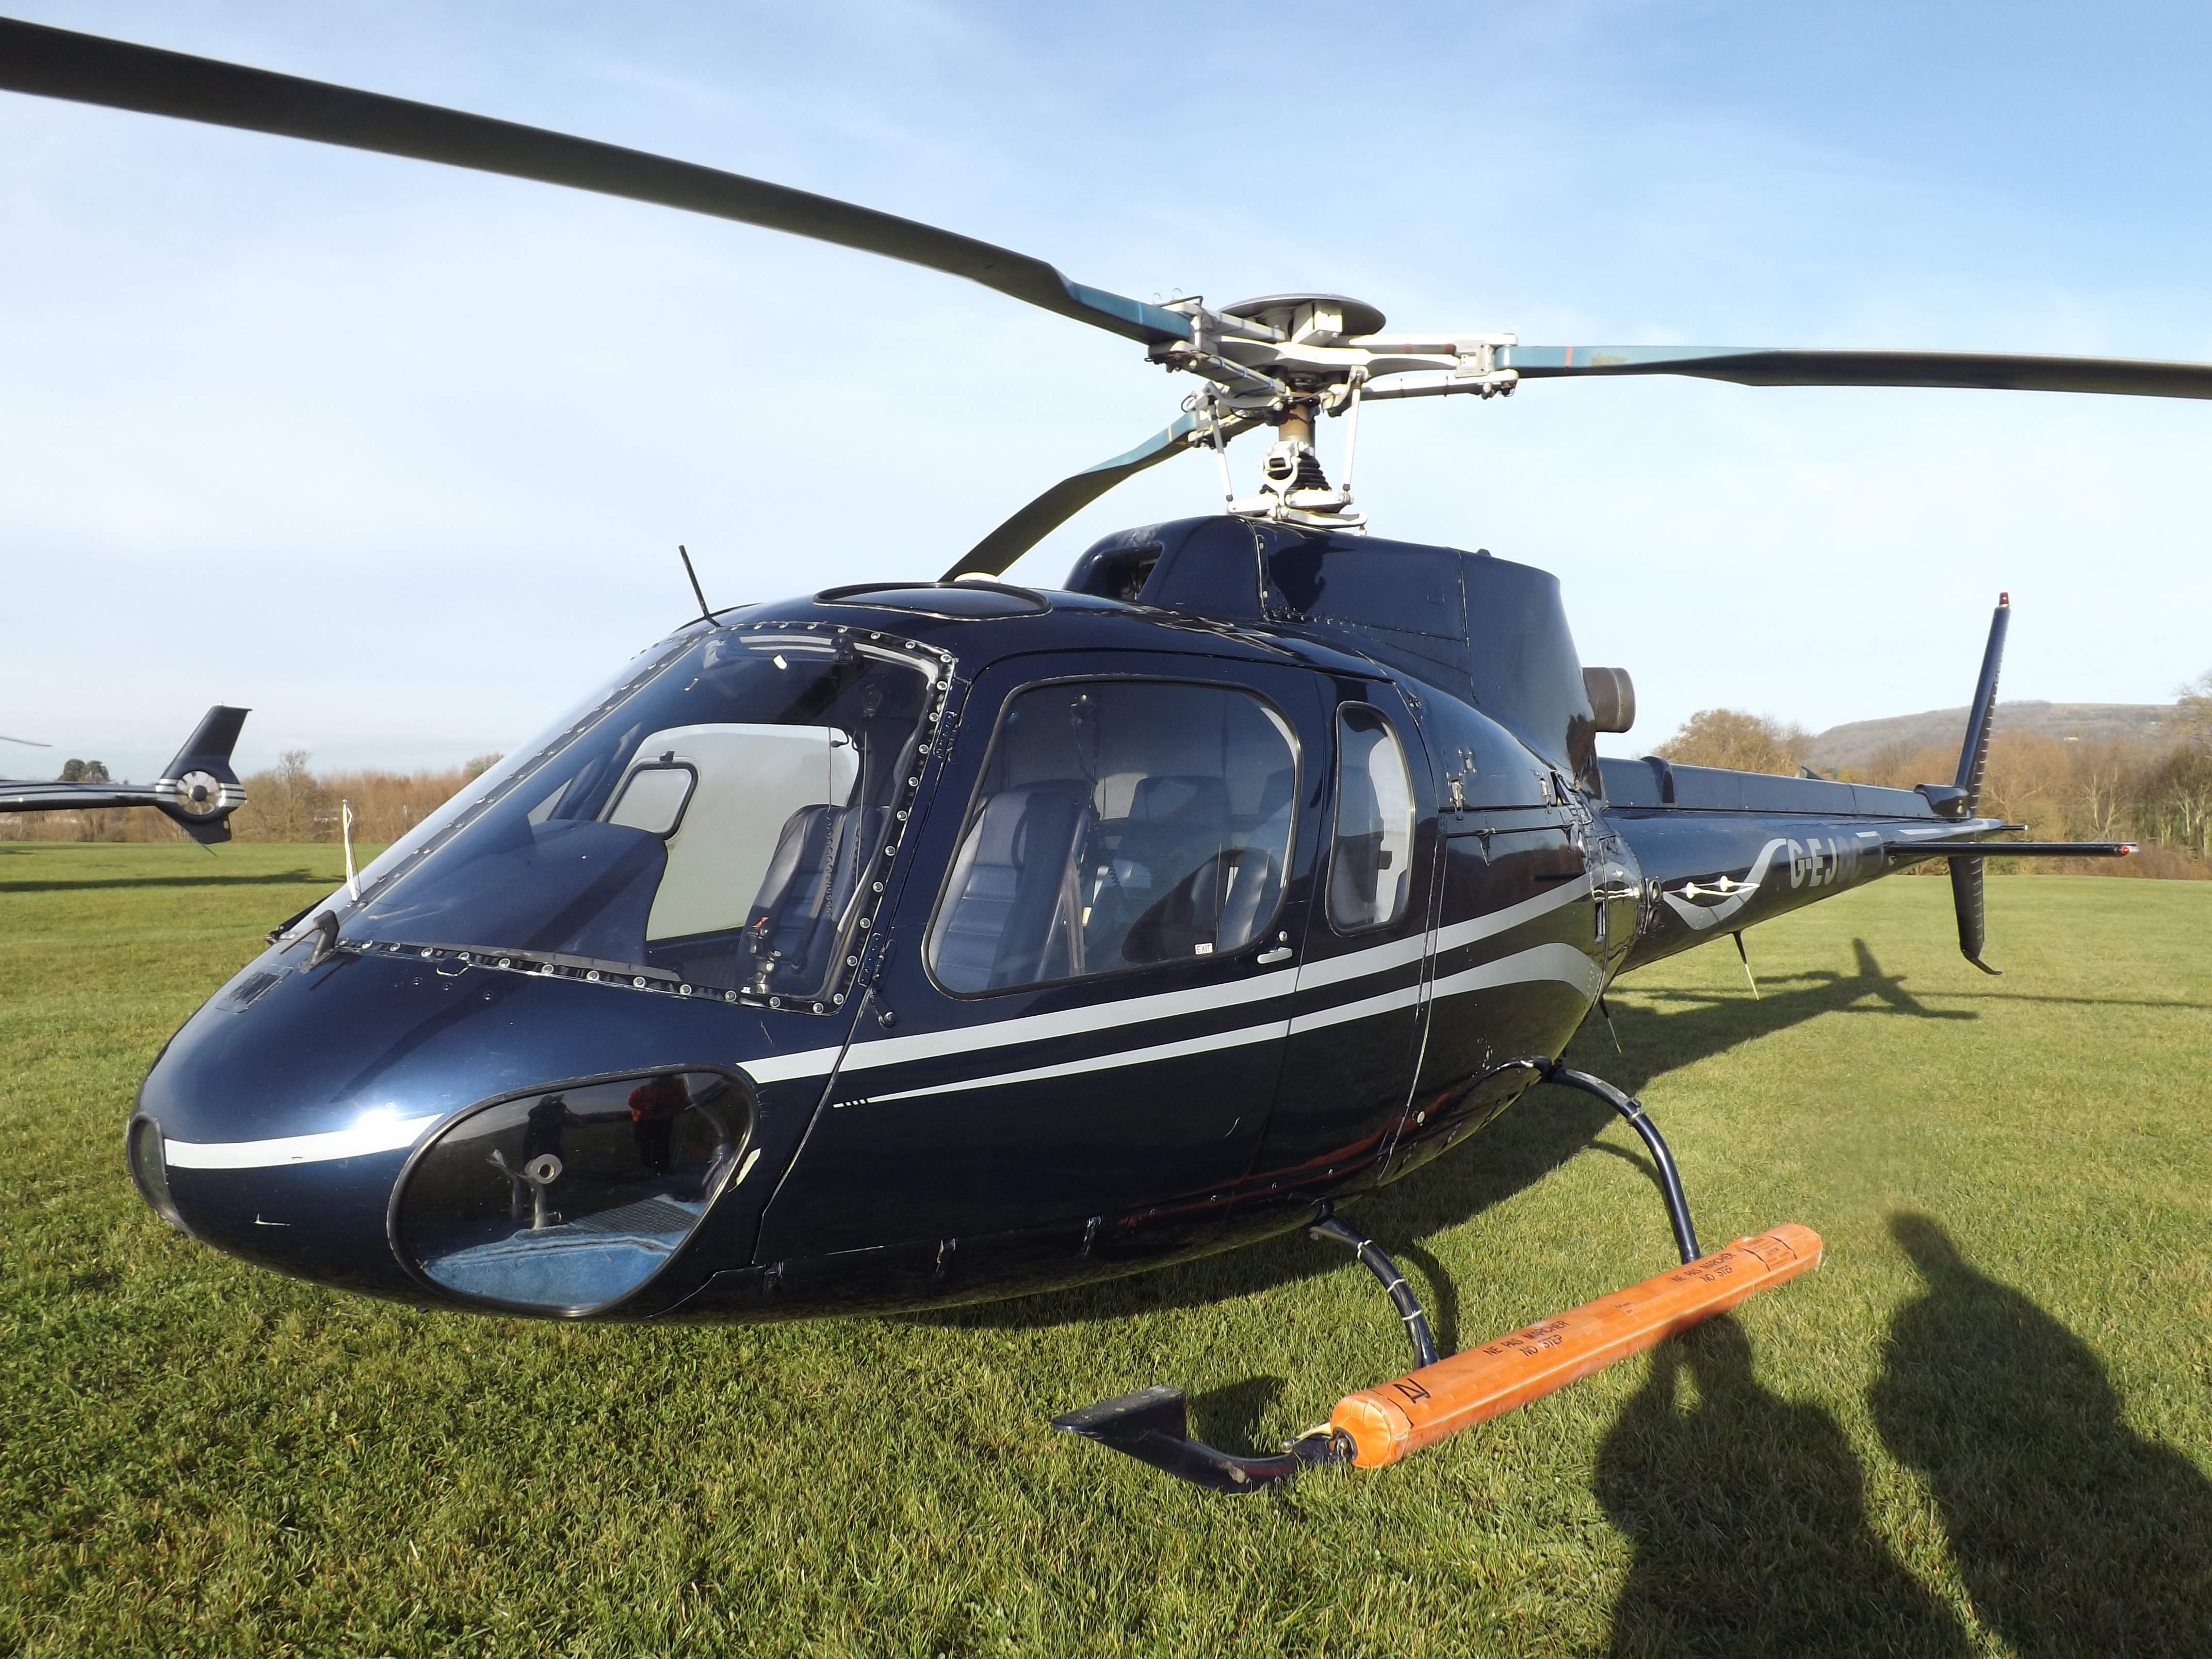 Budgeting Tips: Finding the Perfect Private Helicopter for Adventure Travel without Breaking the Bank